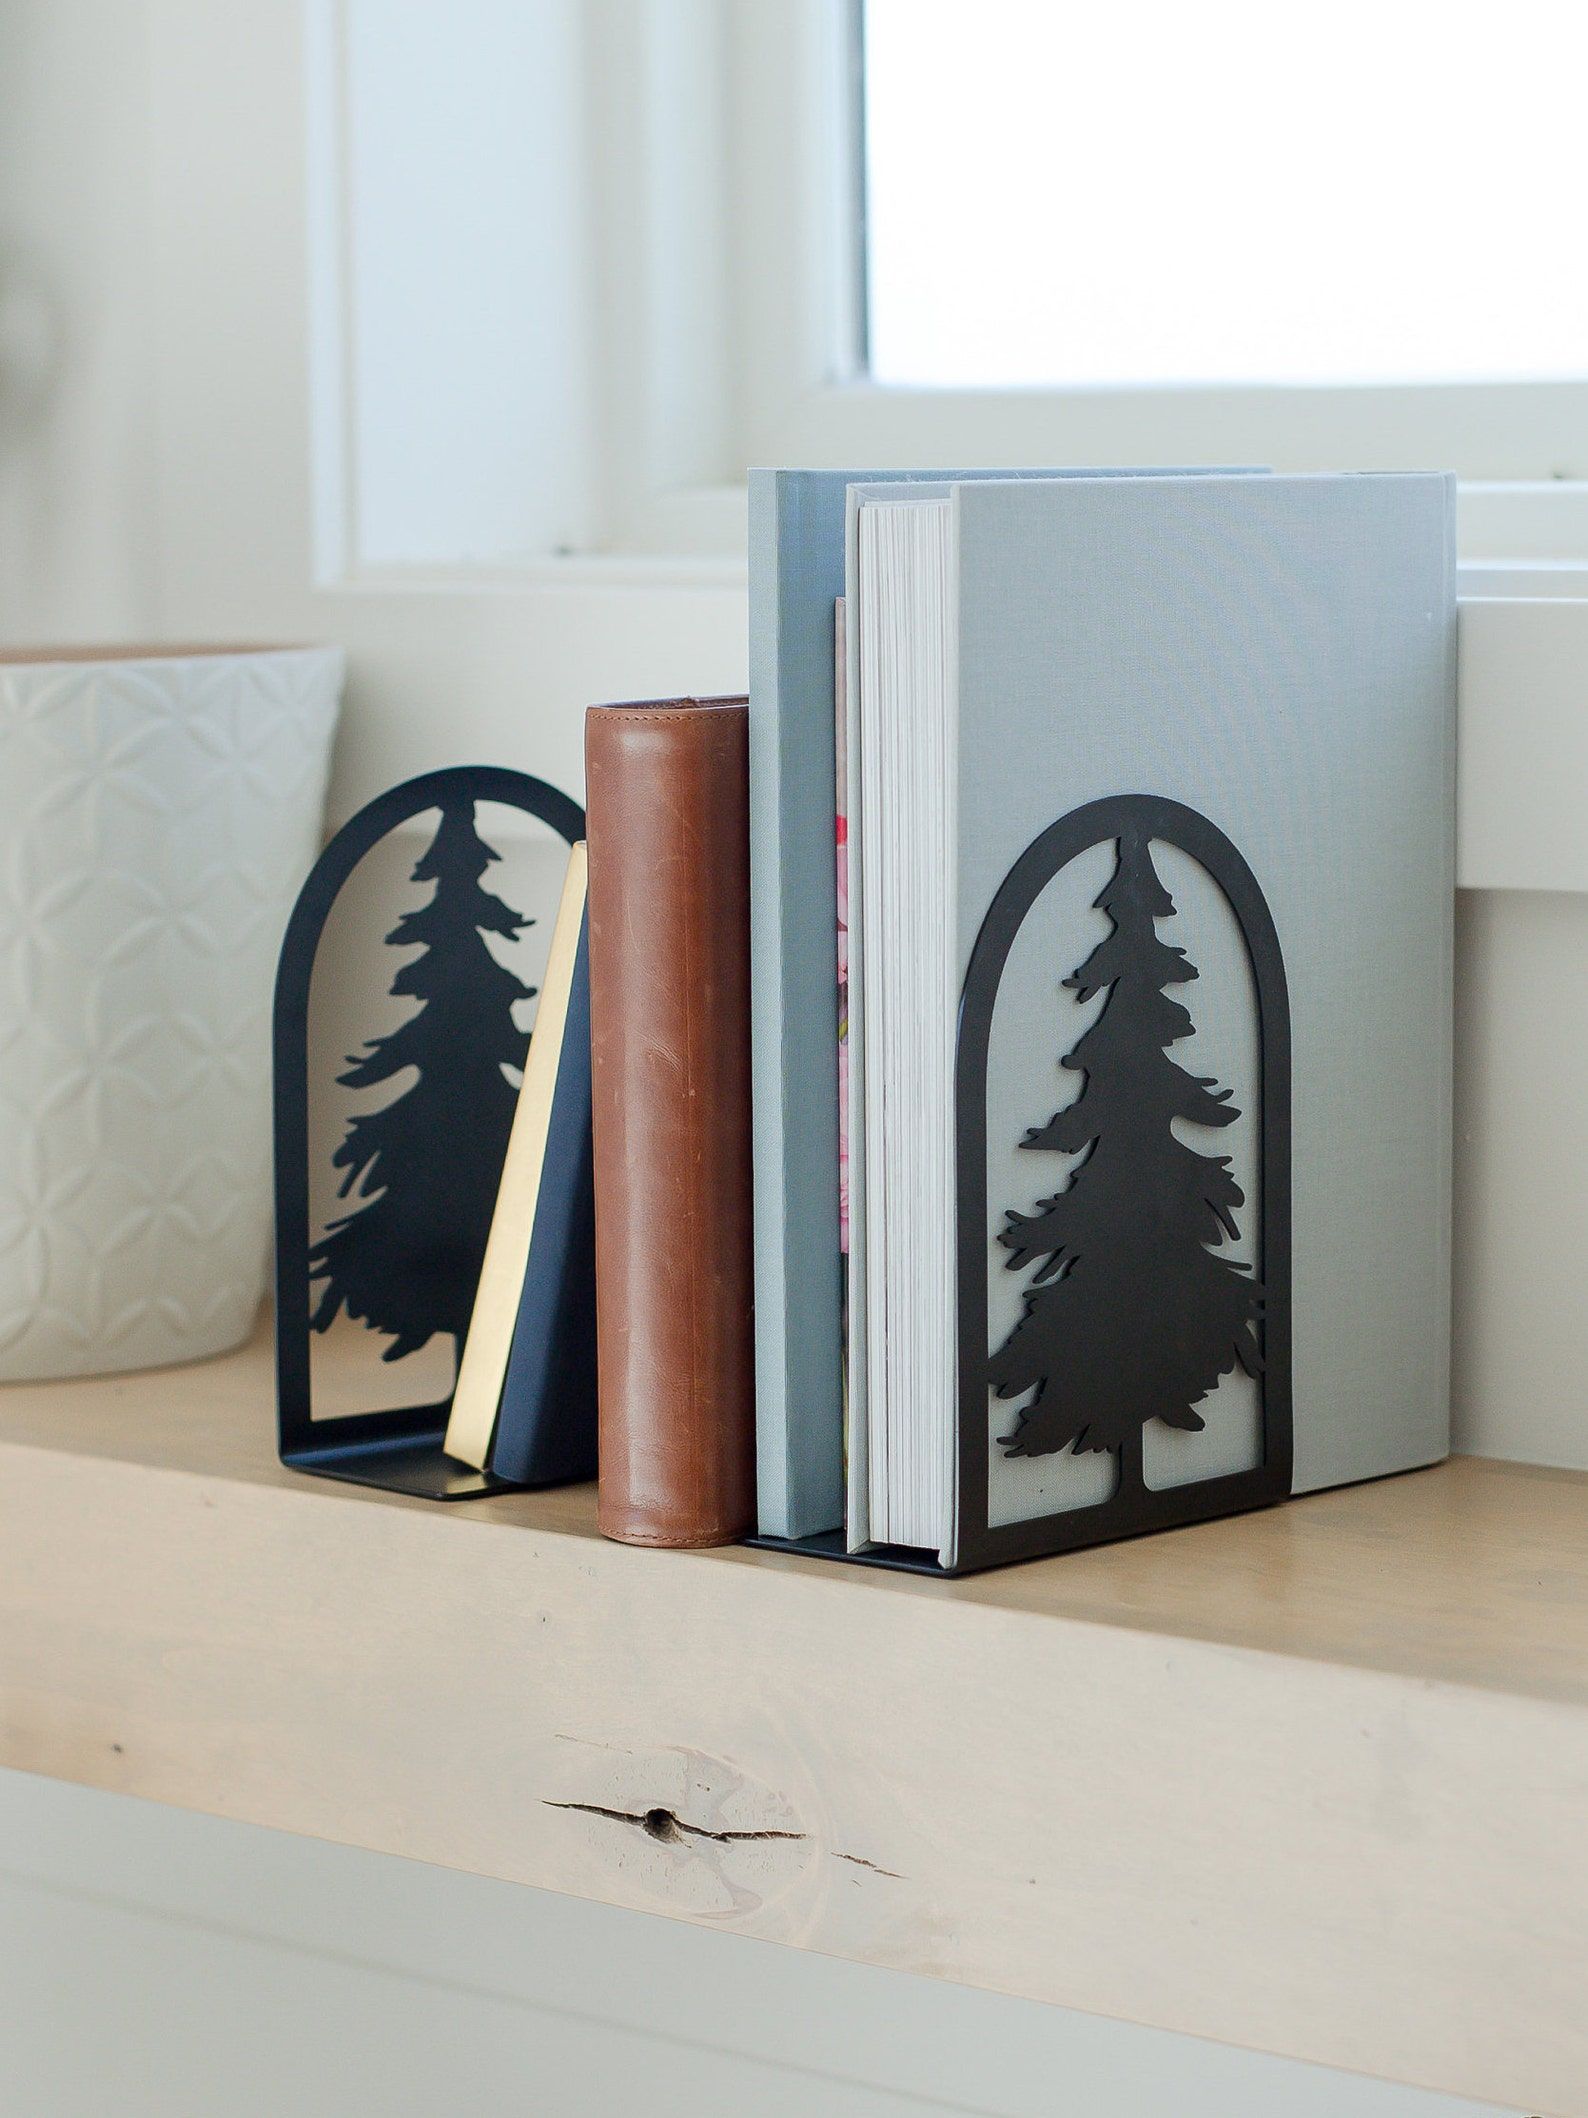 A pair of black steel bookends shaped like spruce trees on a small shelf of books.